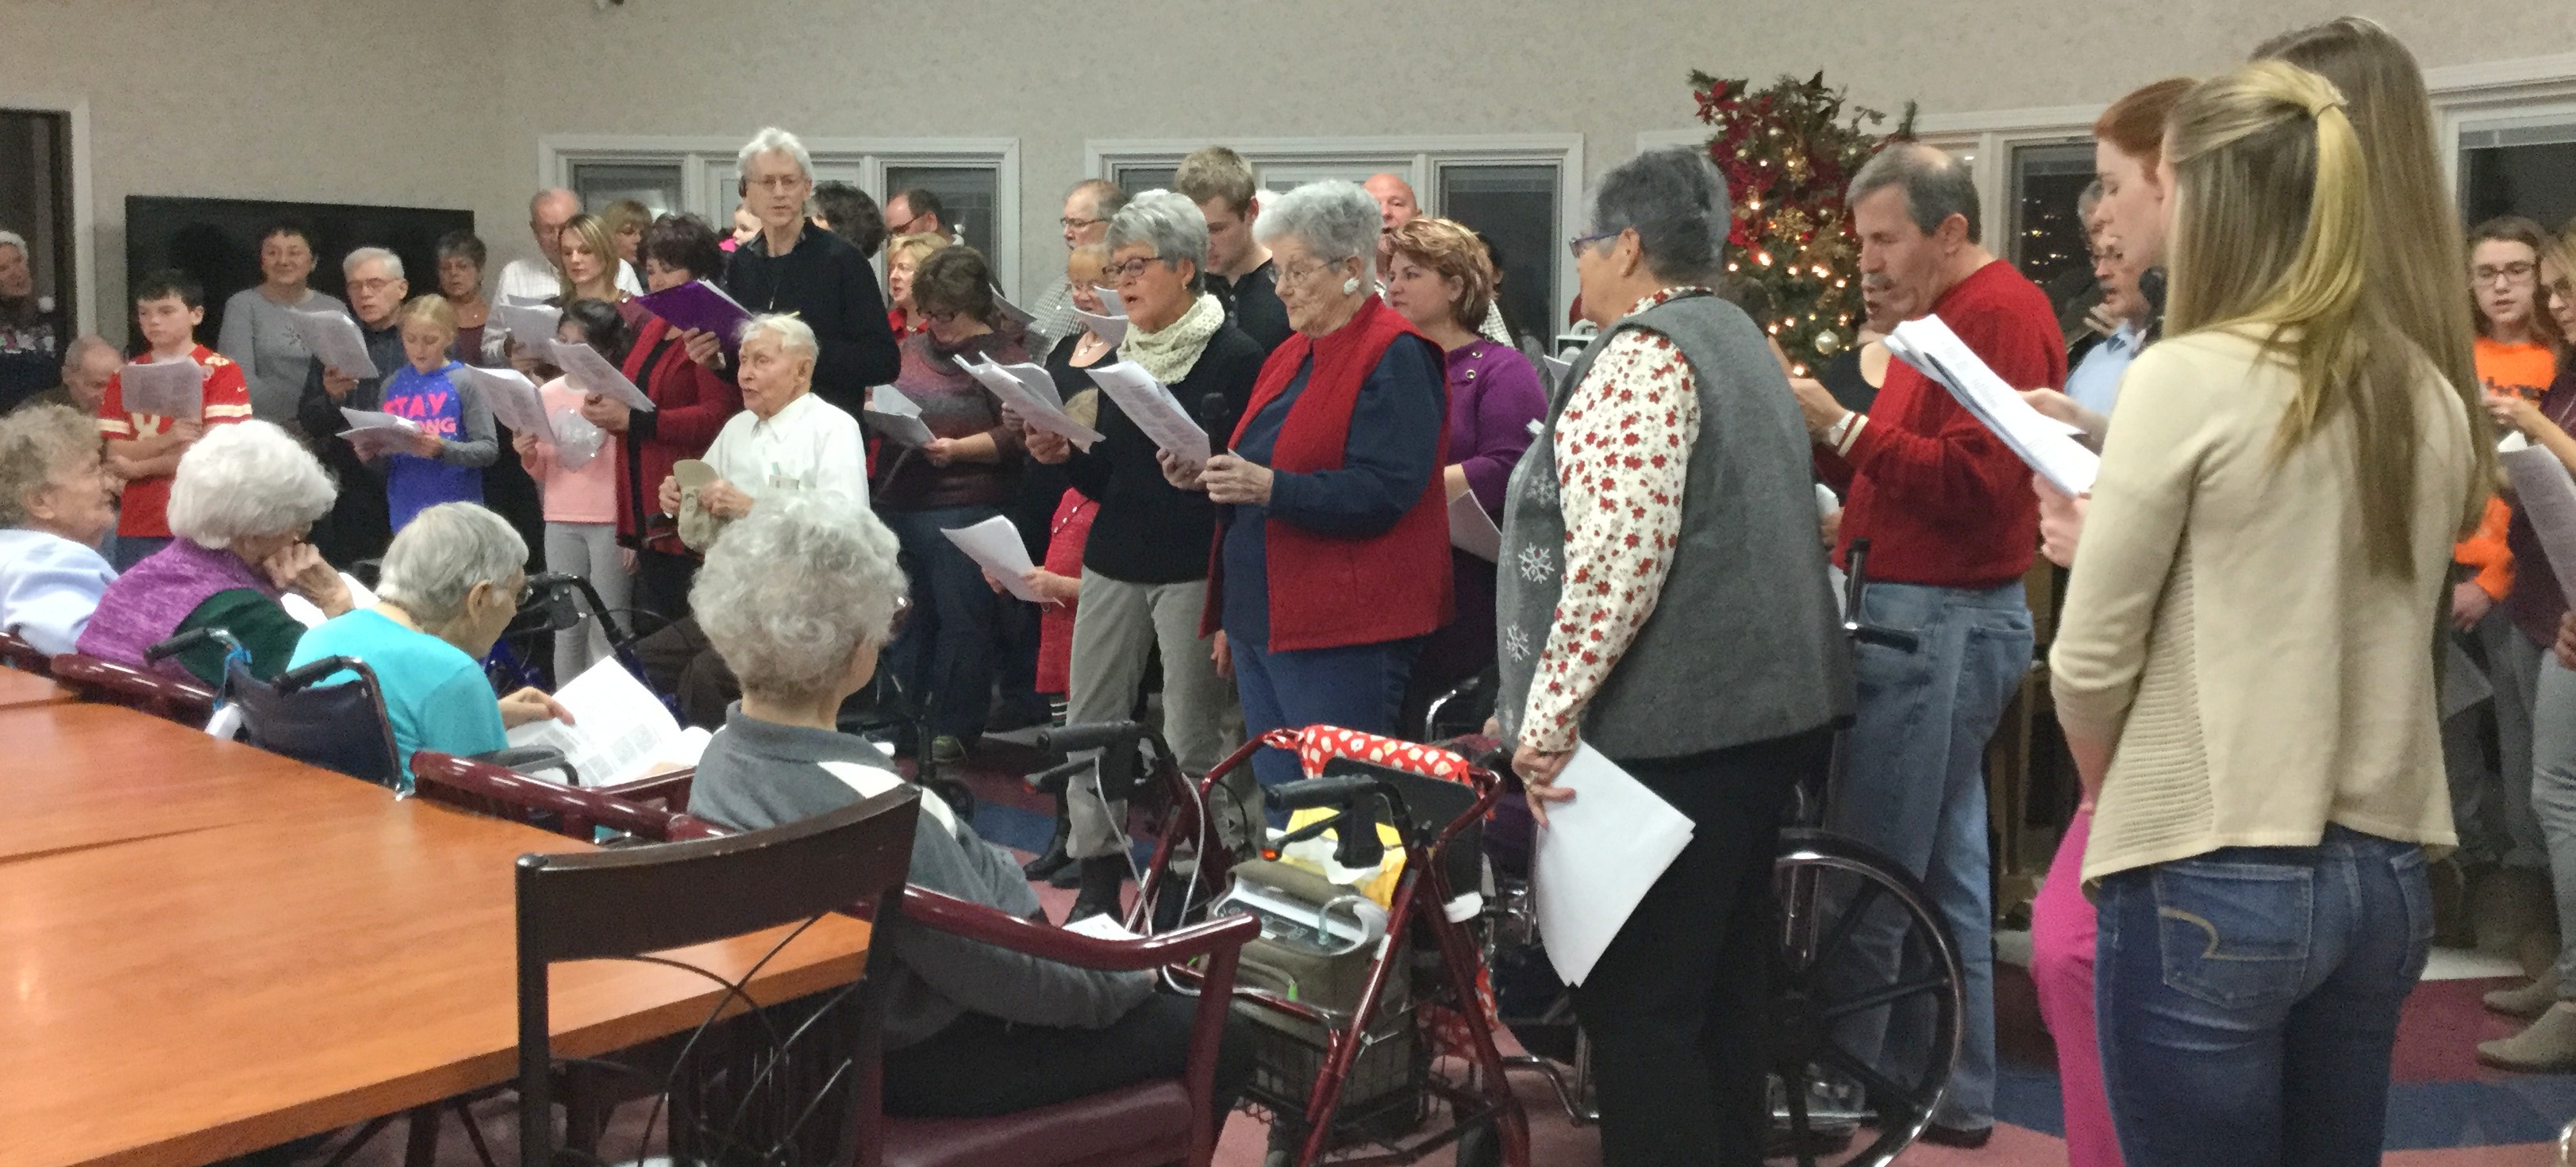 Dunlap Specialty Care Christmas carolers